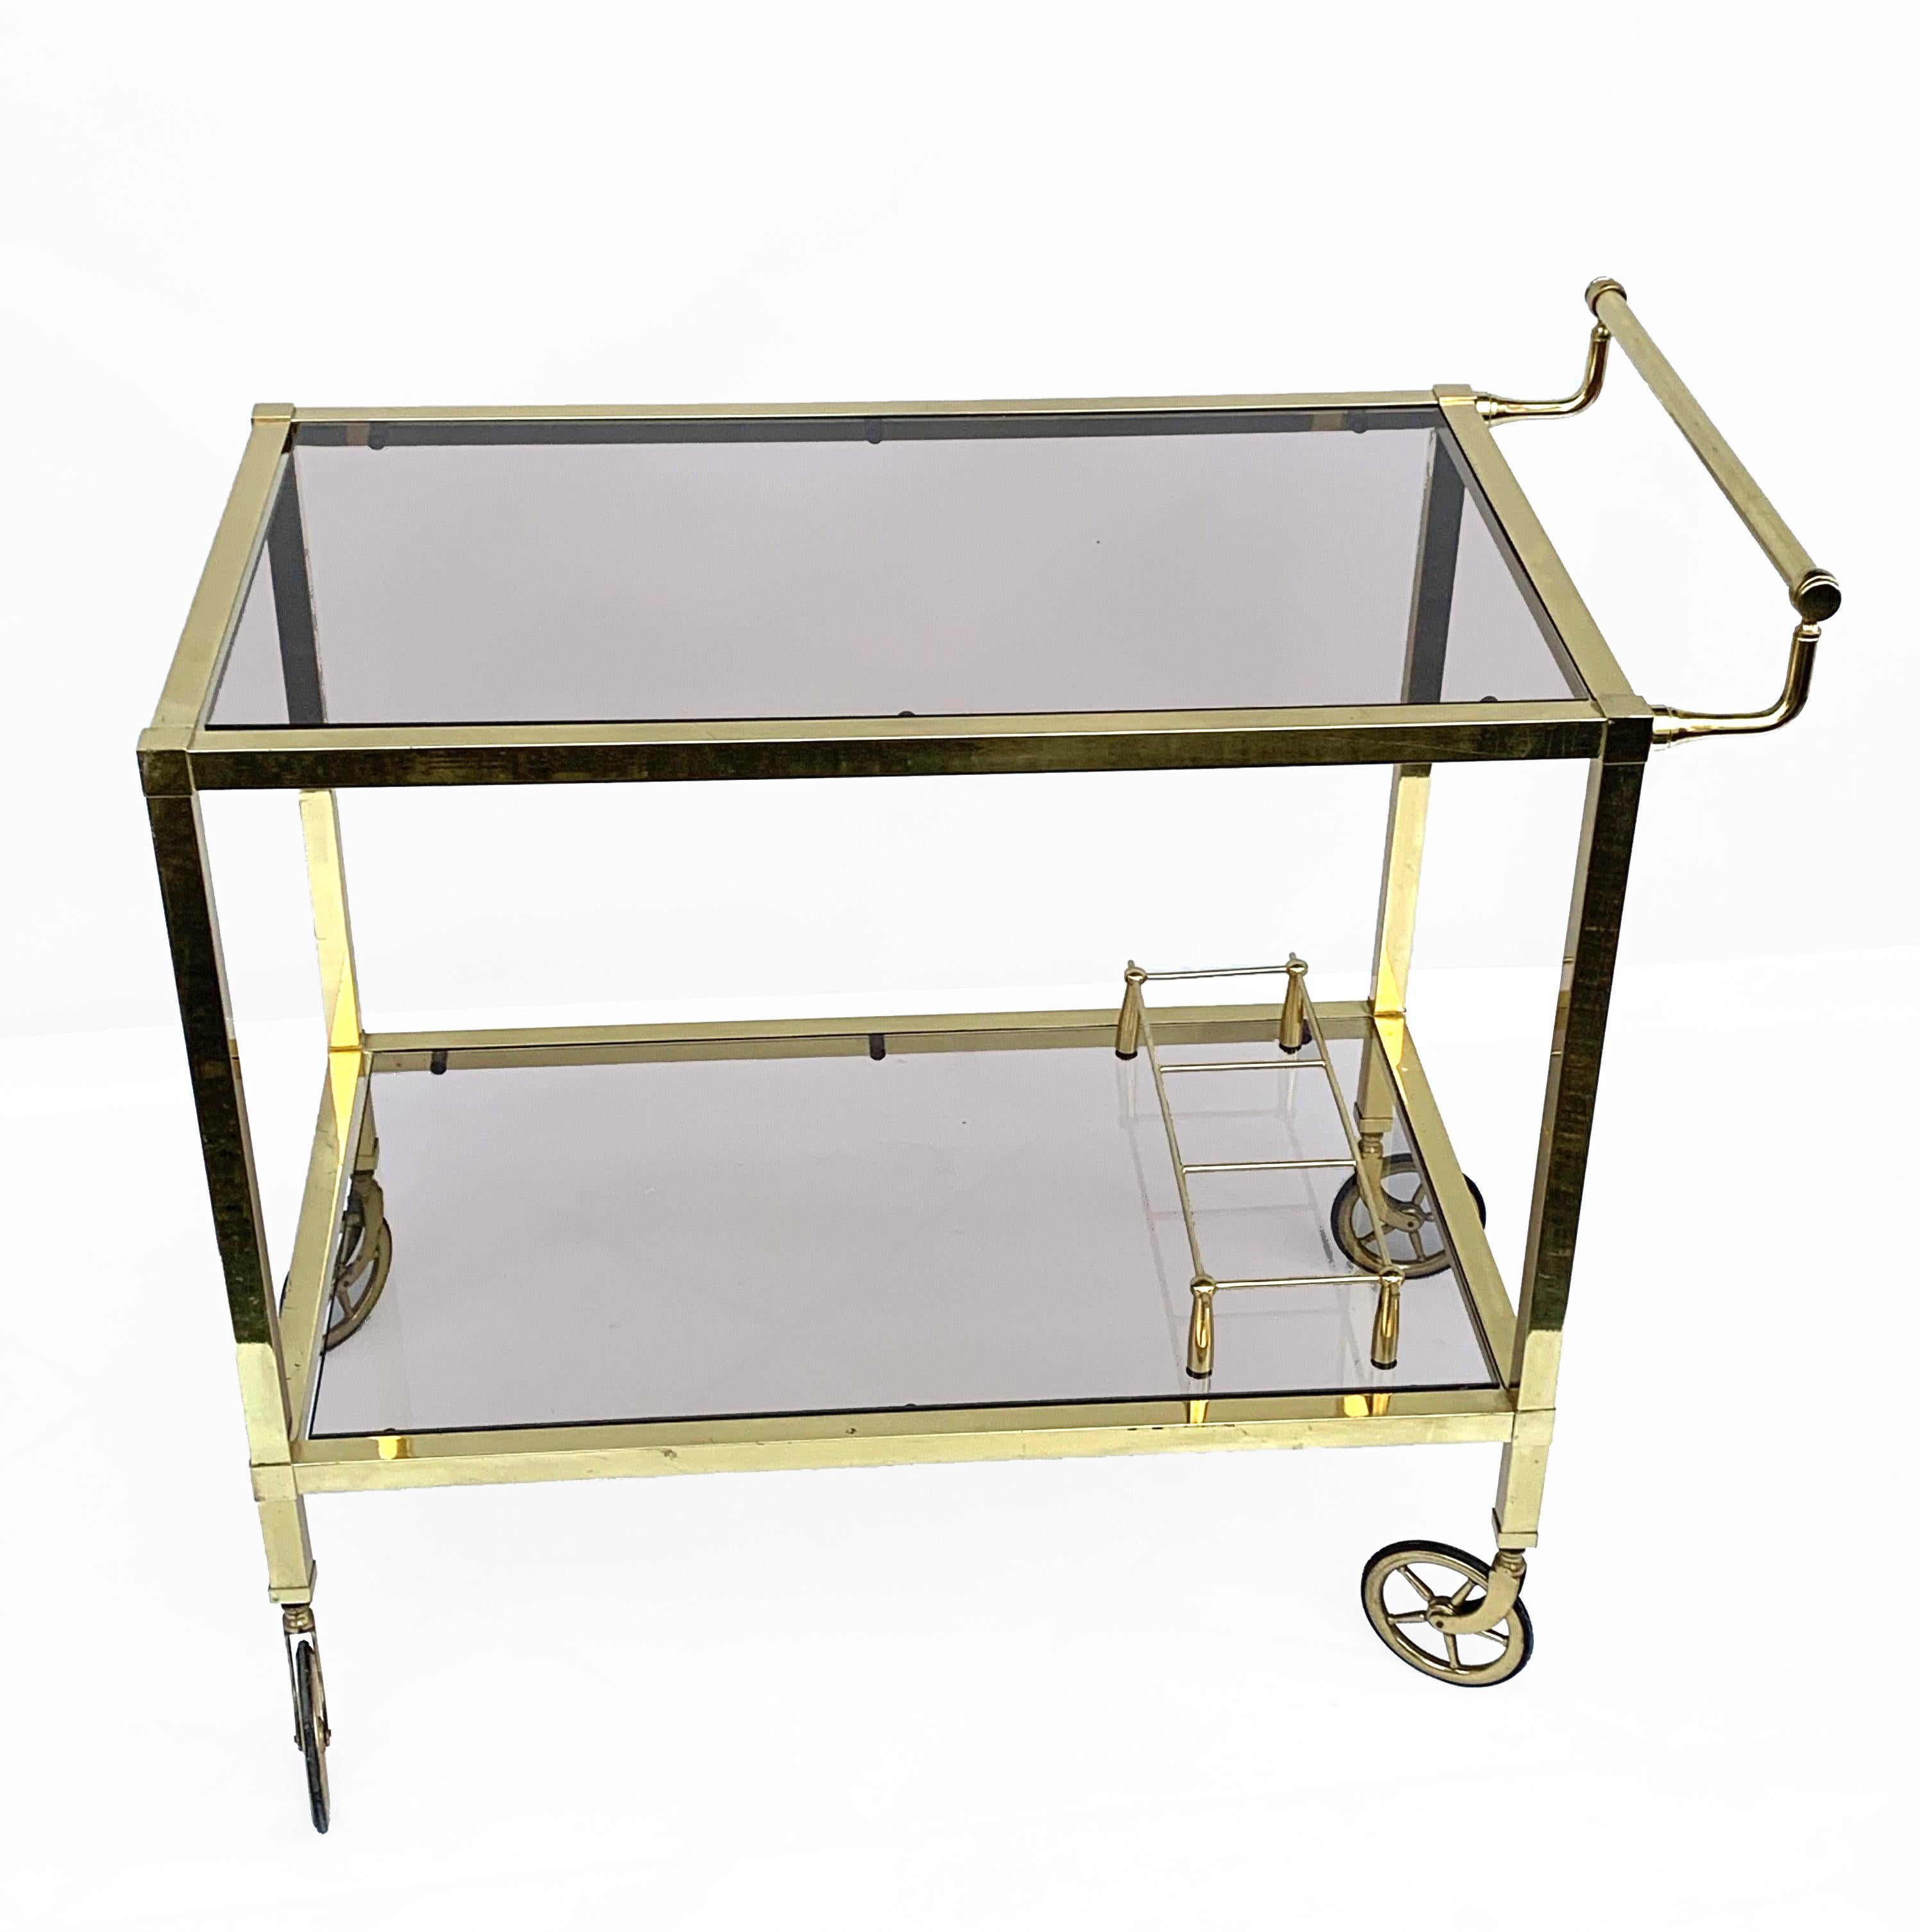 Exceptional two-level service cart from the Italian manufacturer.
Bar cart on two levels and smoked glass, Italy 1970s gold-plated.
Brass with bottle holder.